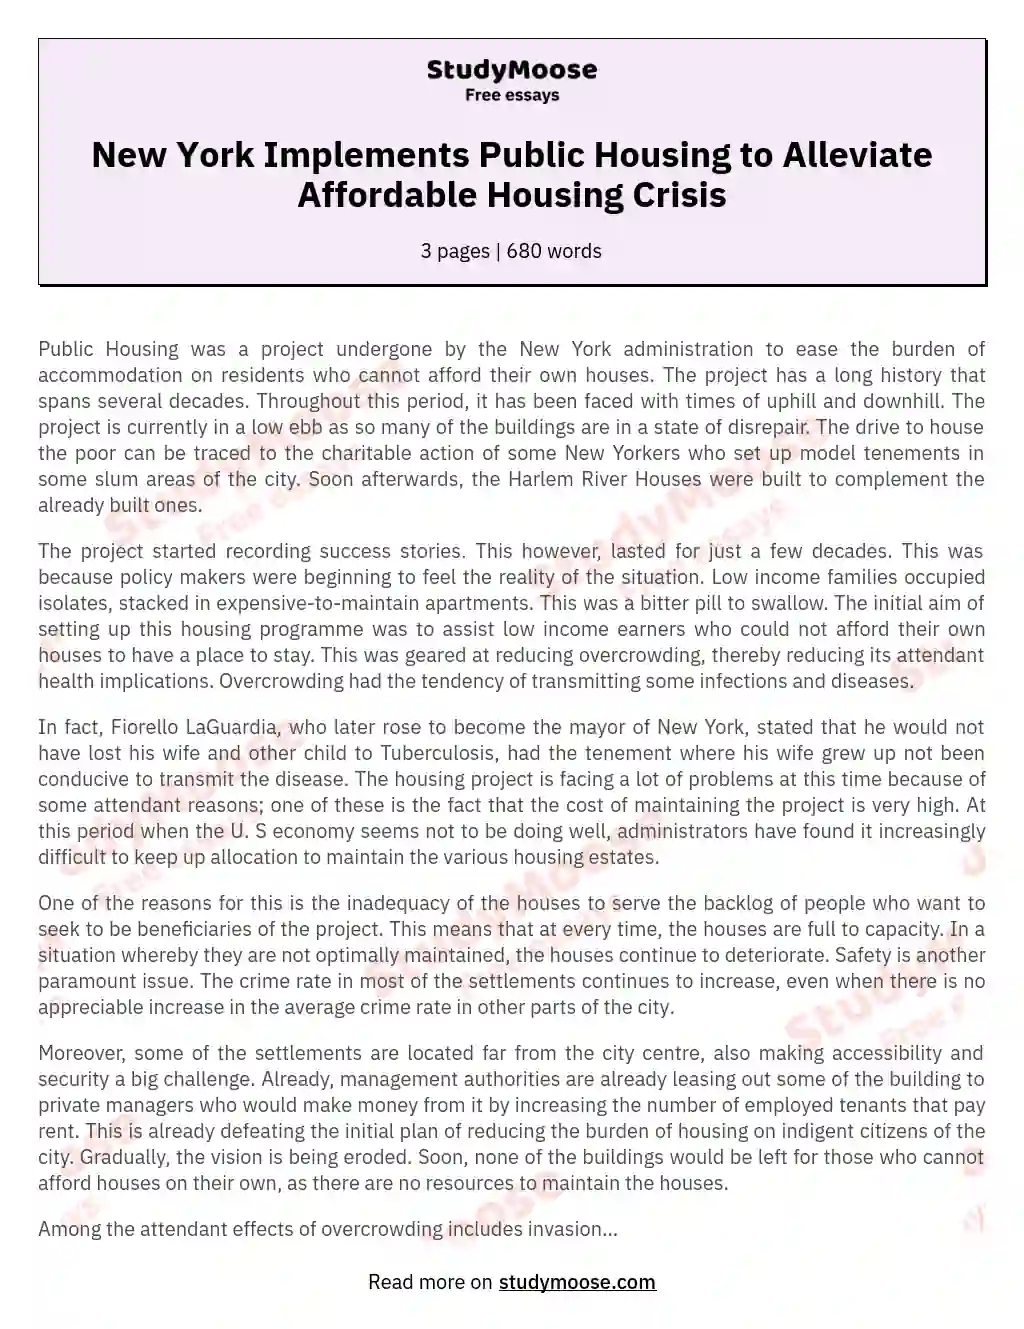 New York Implements Public Housing to Alleviate Affordable Housing Crisis essay